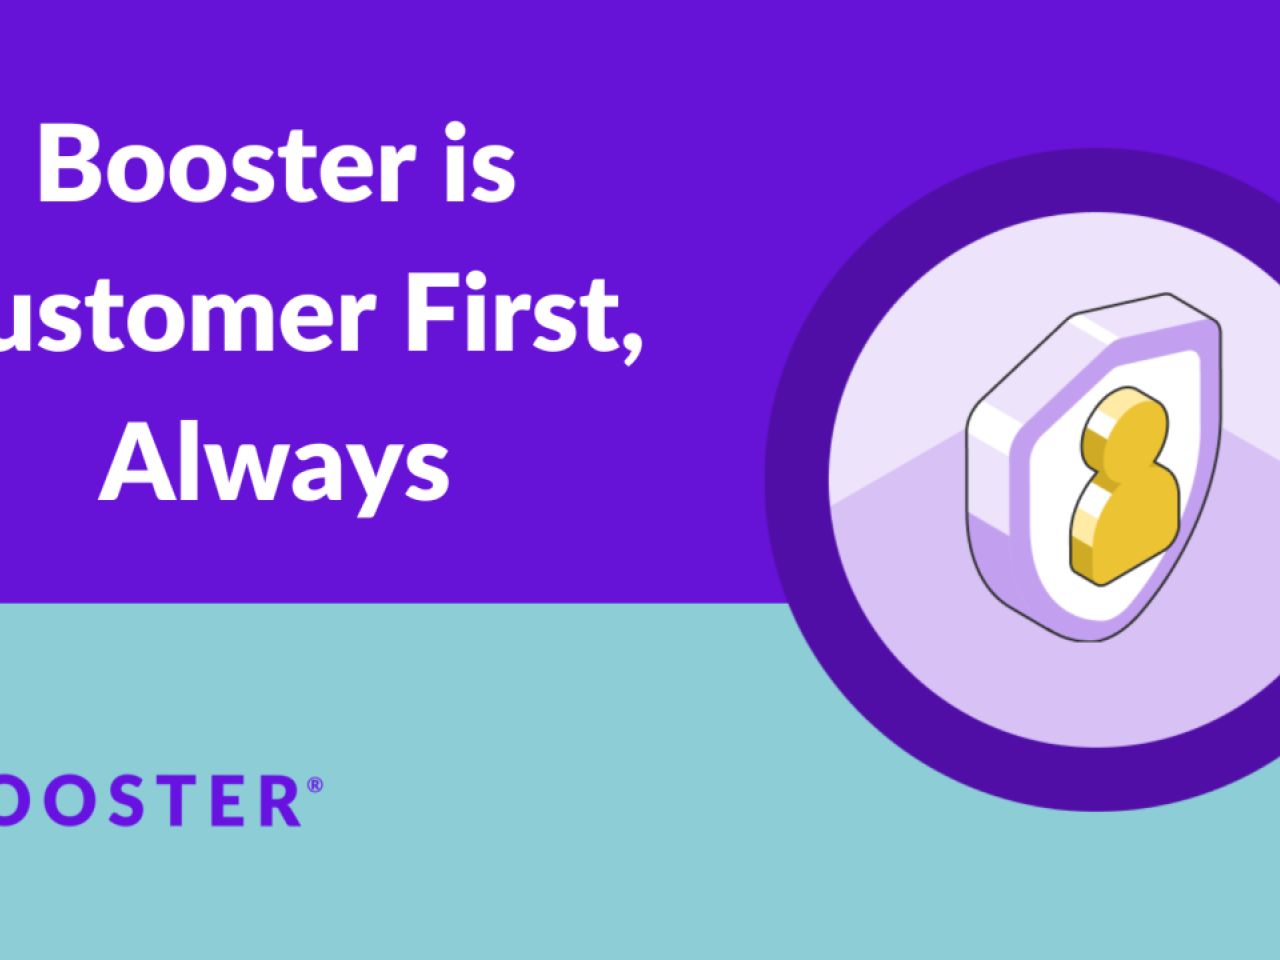 A customer badge hovers over a teal and purple background. The text reads "Booster is Customer First, Always."